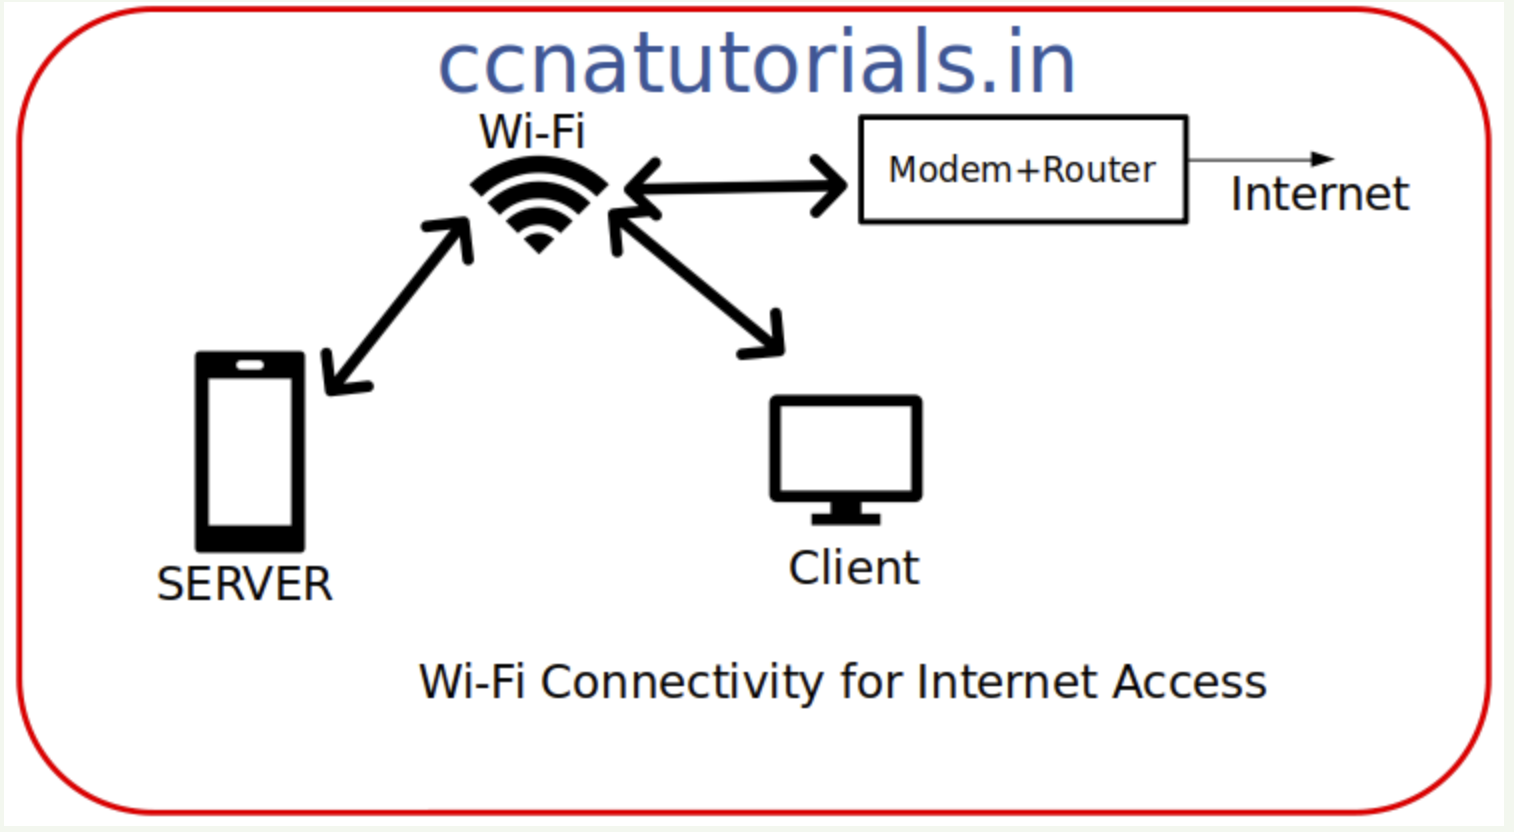 Wireless Router in Packet Tracer Network, ccna, ccna tutorials